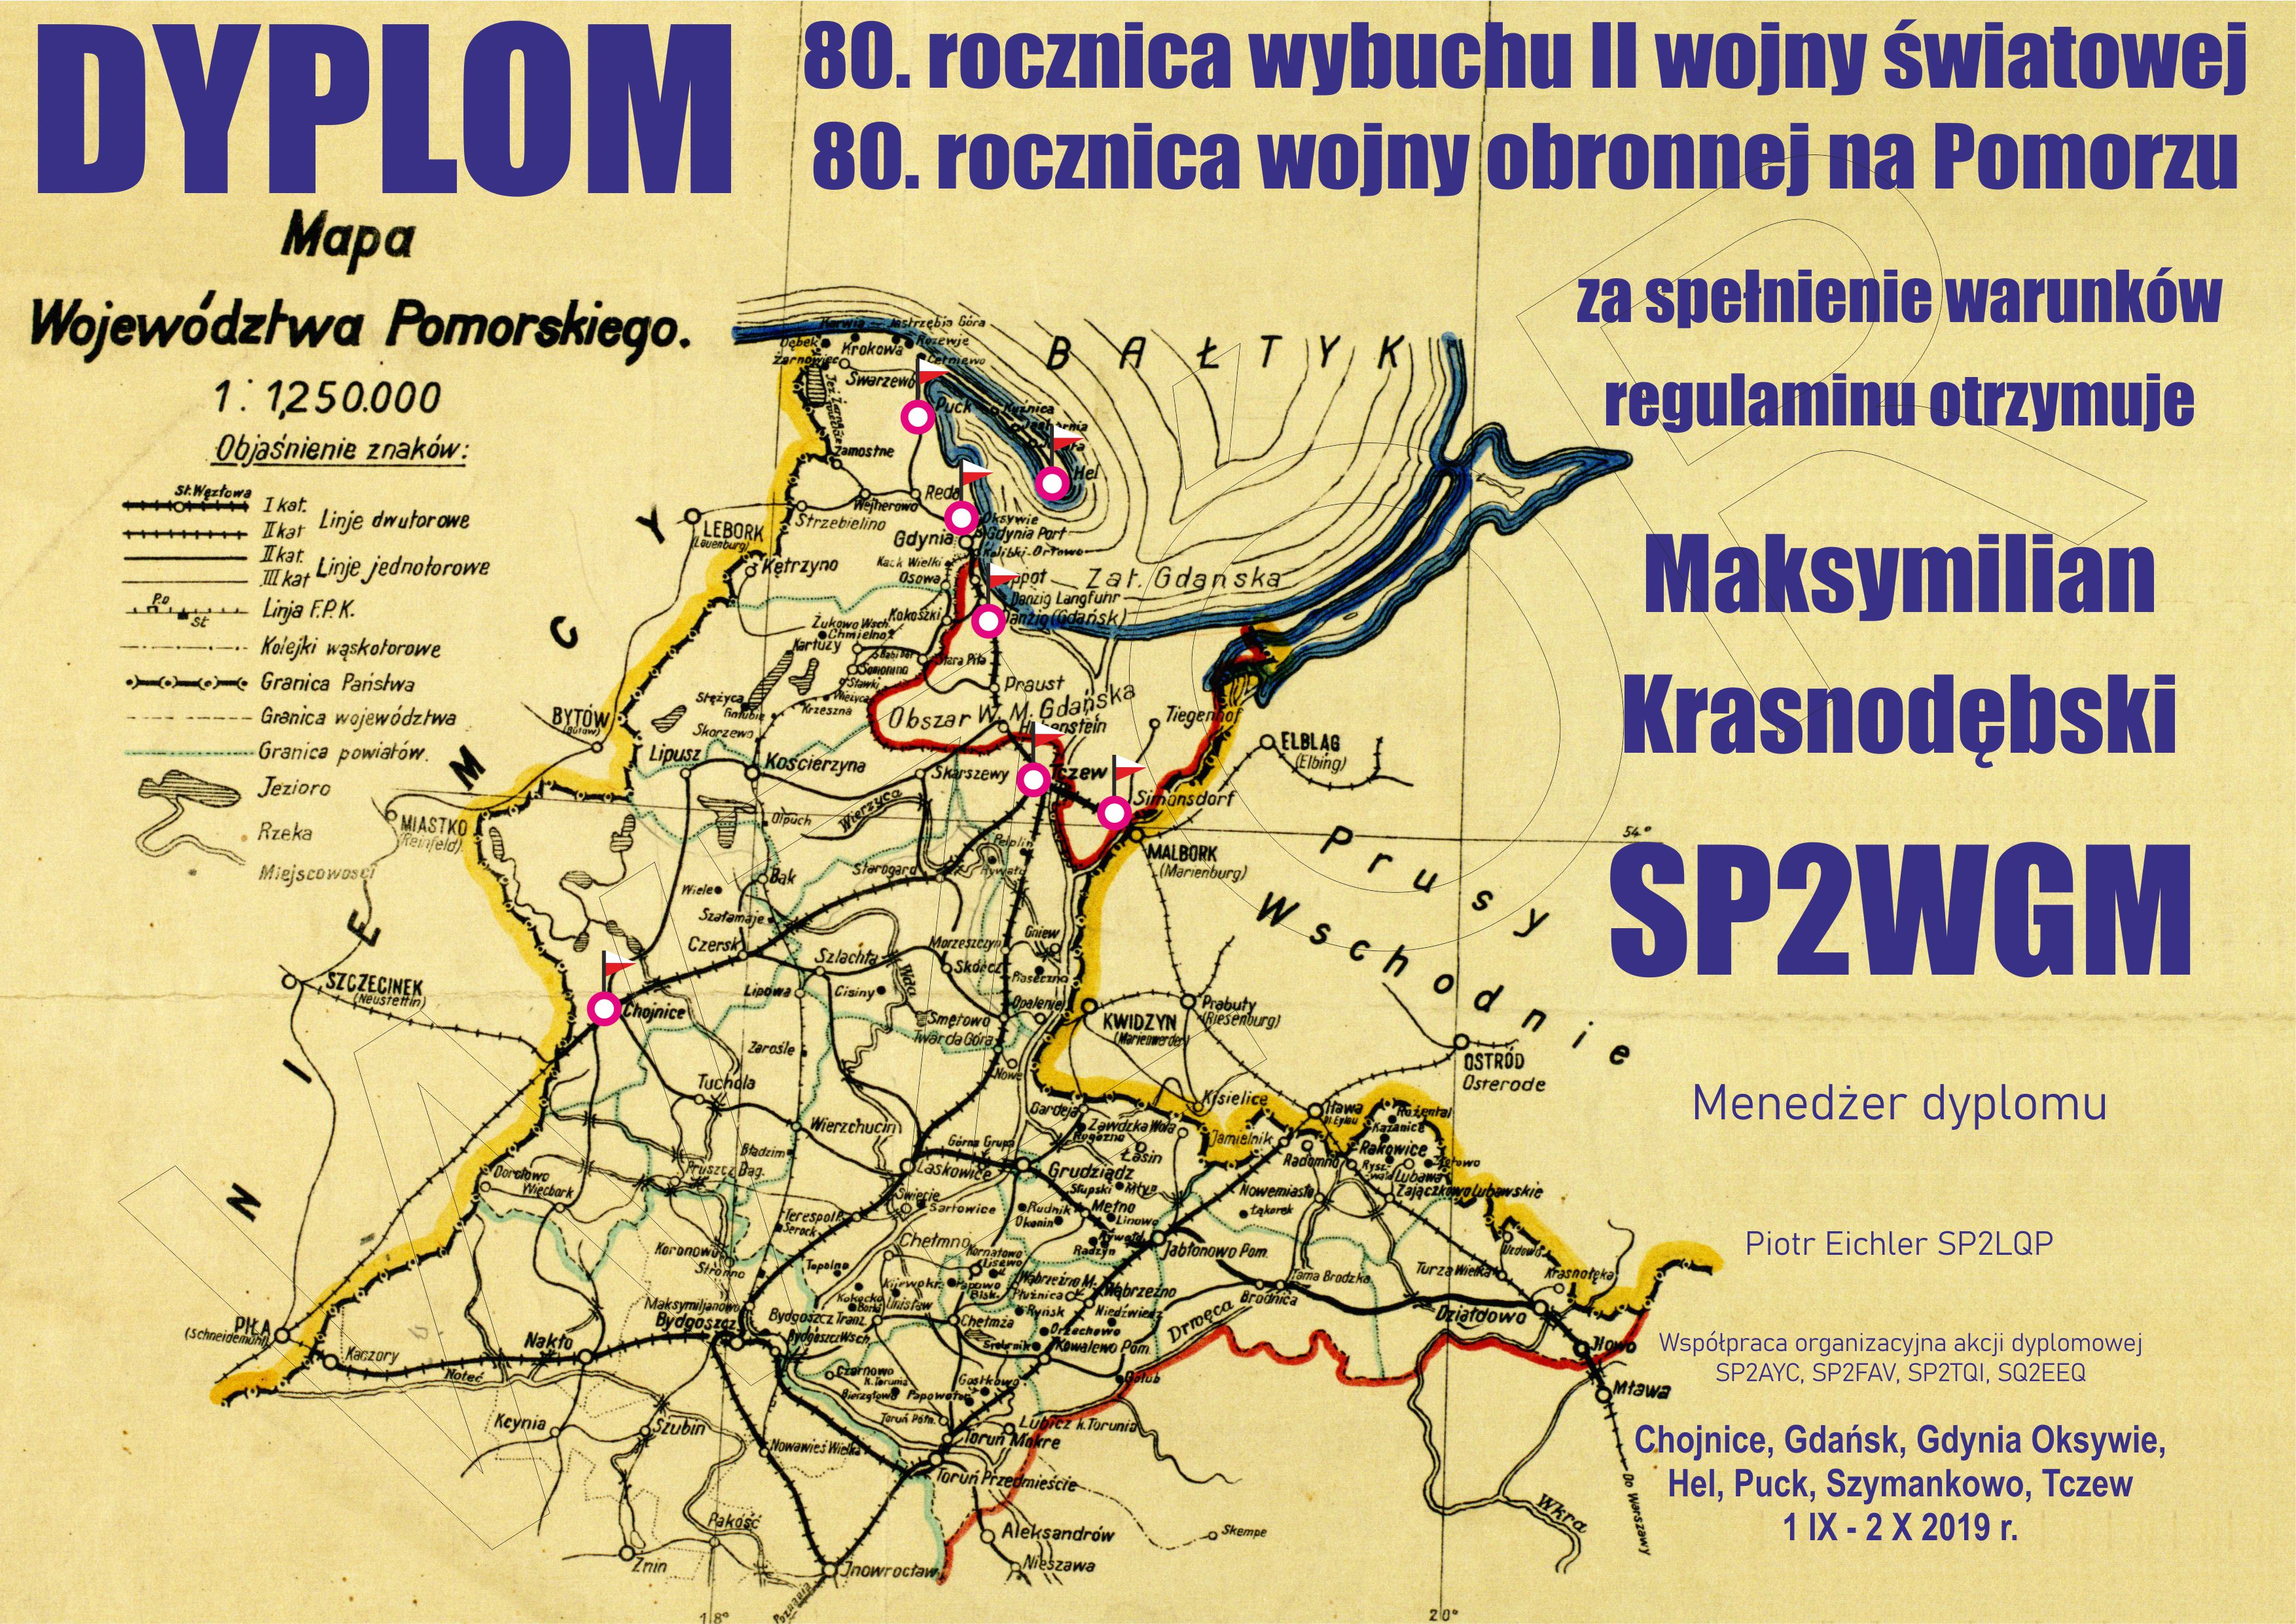 SP2LQP 80 rocznica dyplom